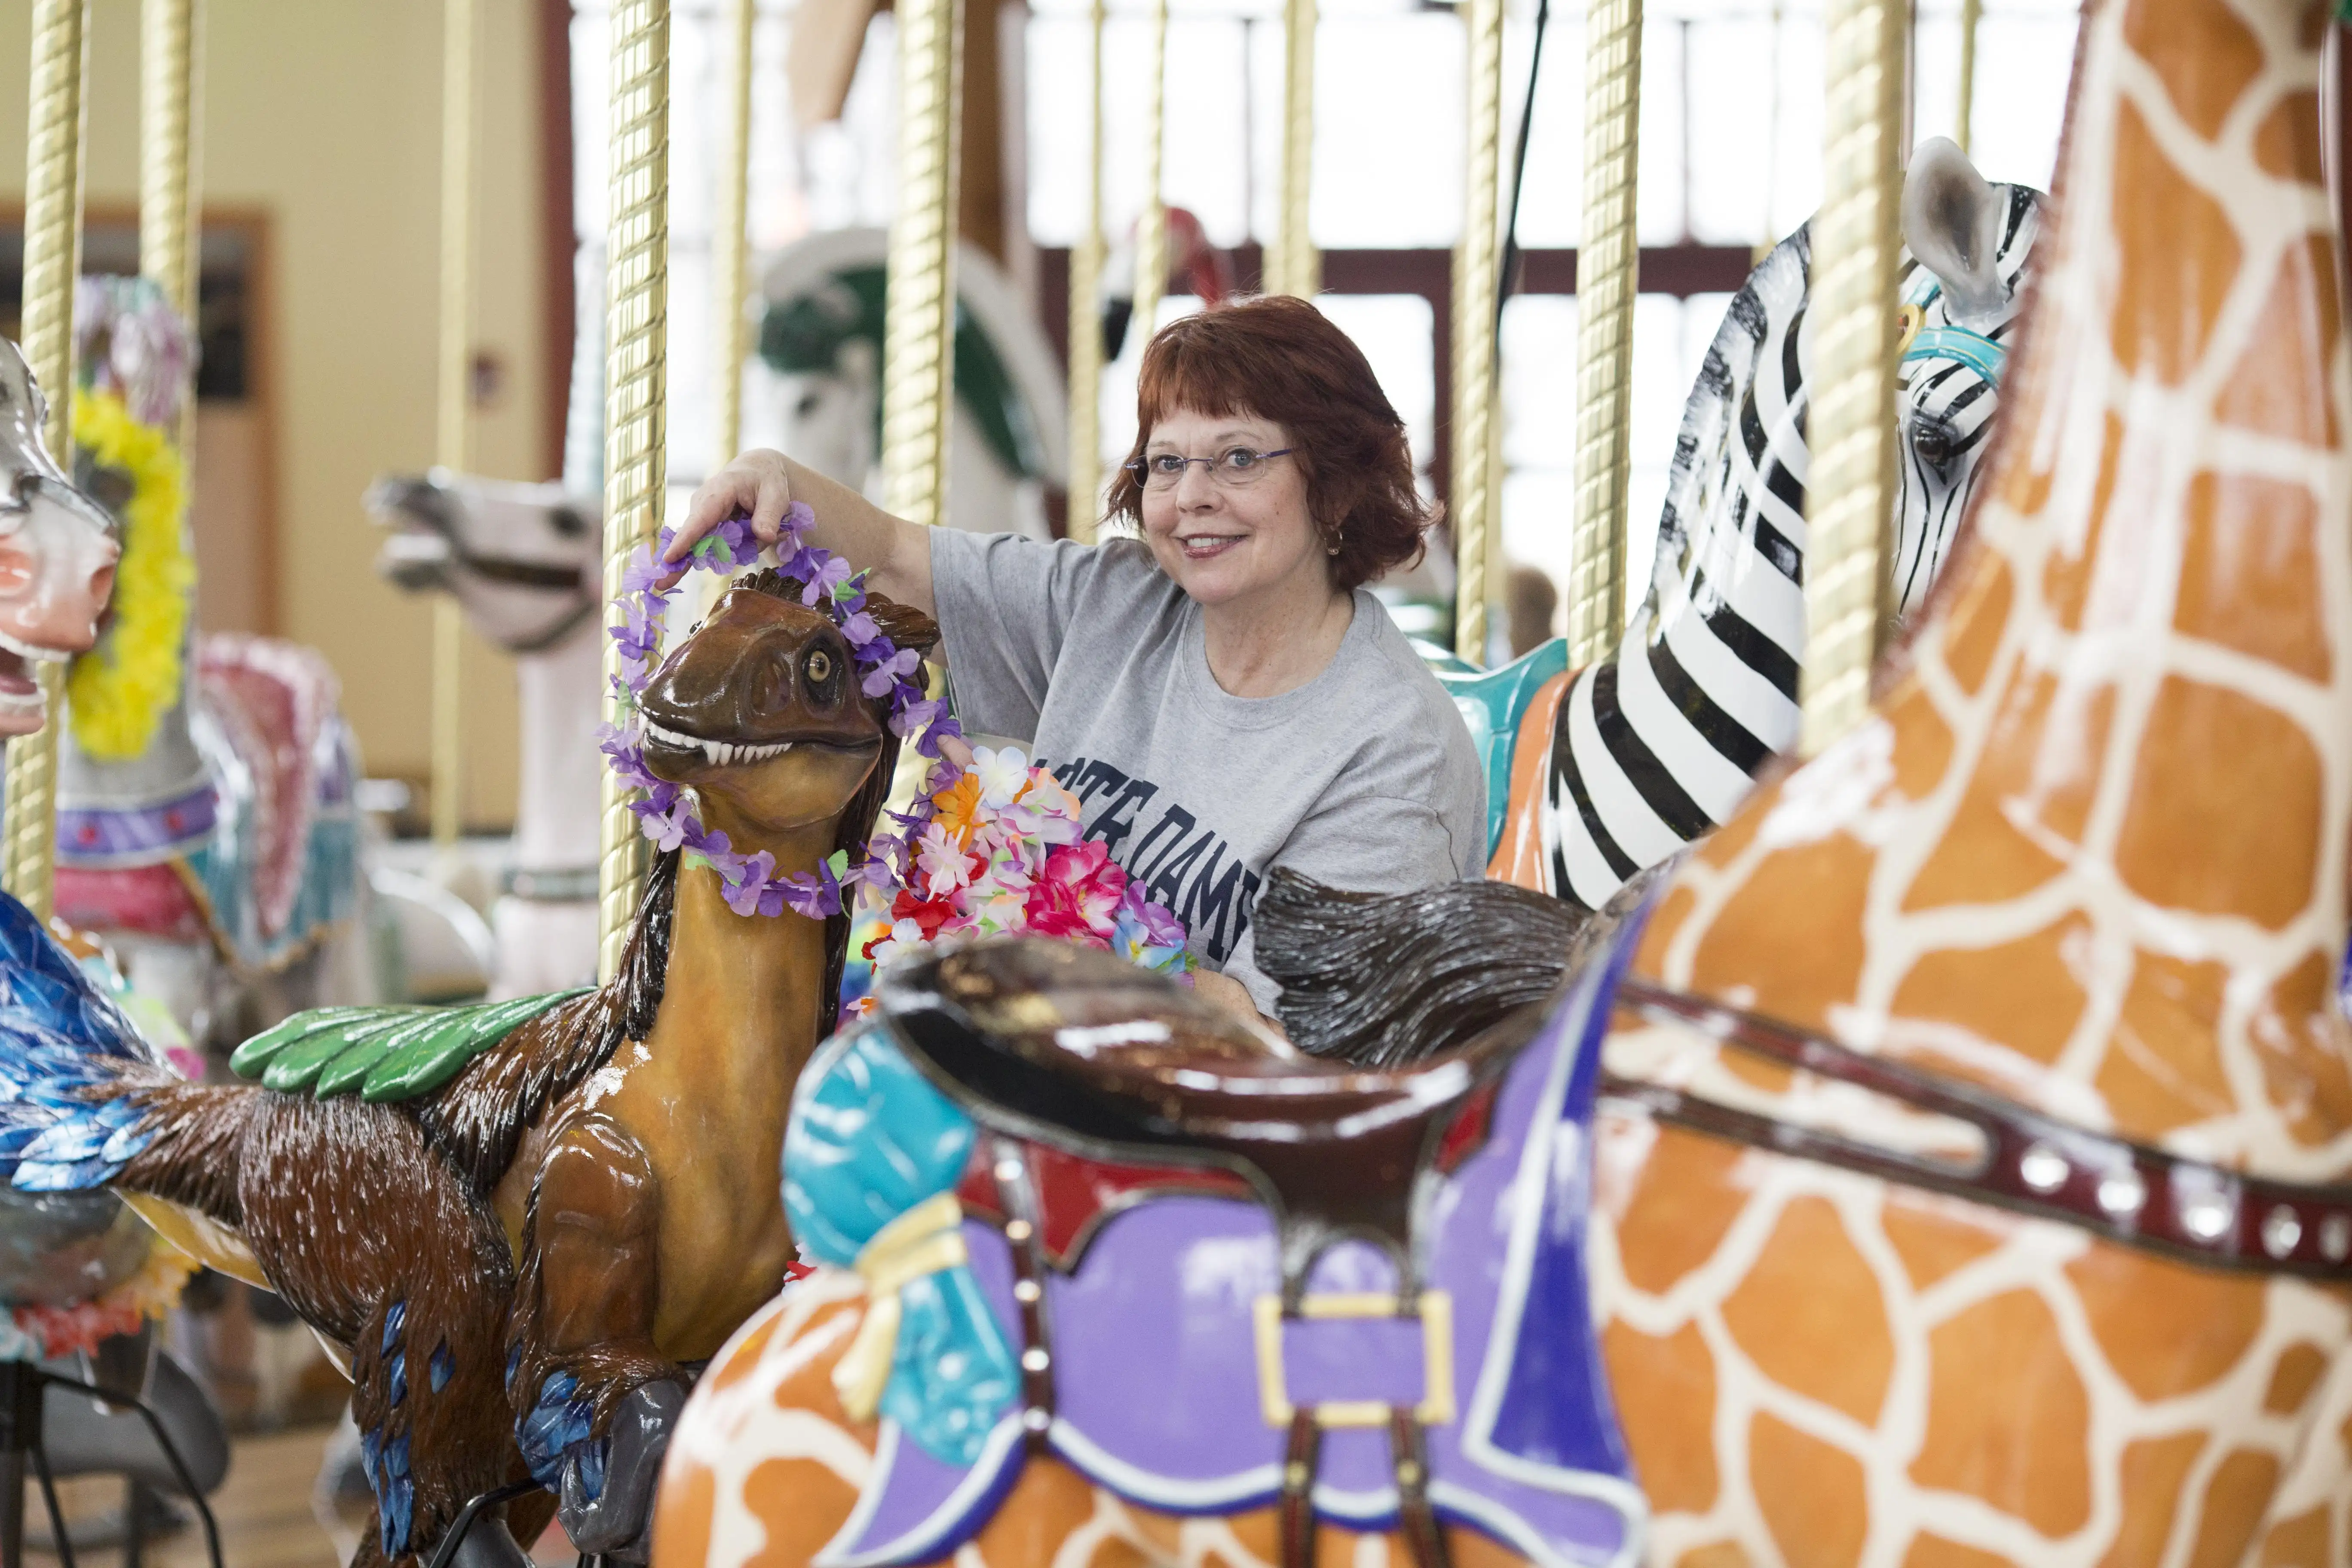 A volunteer decorating the carousel.